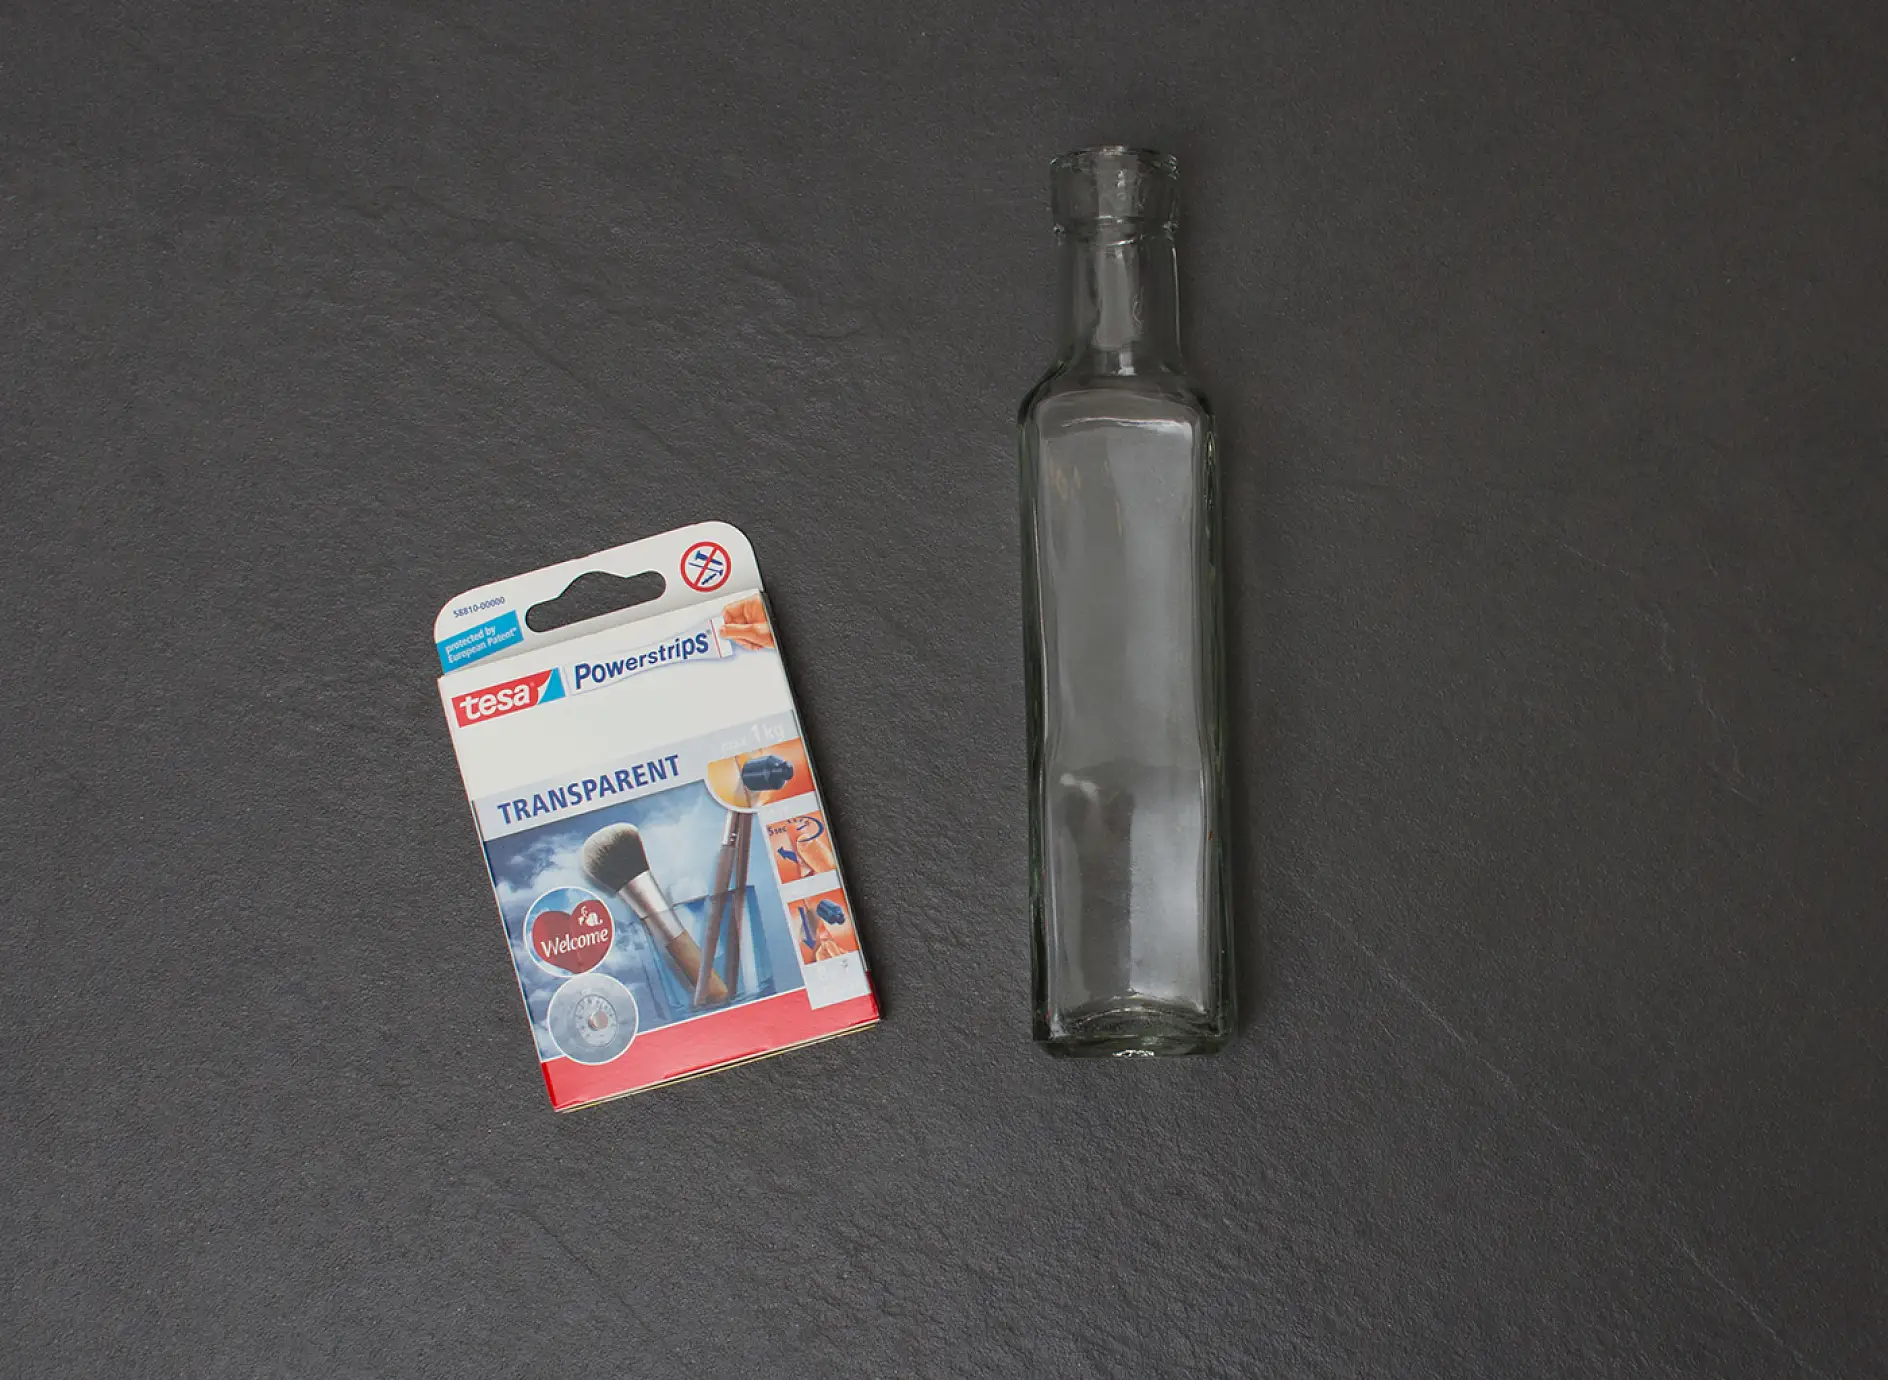 tesa Powerstrips® Strips Transparent Large can be used to make wall vases from glass bottles.